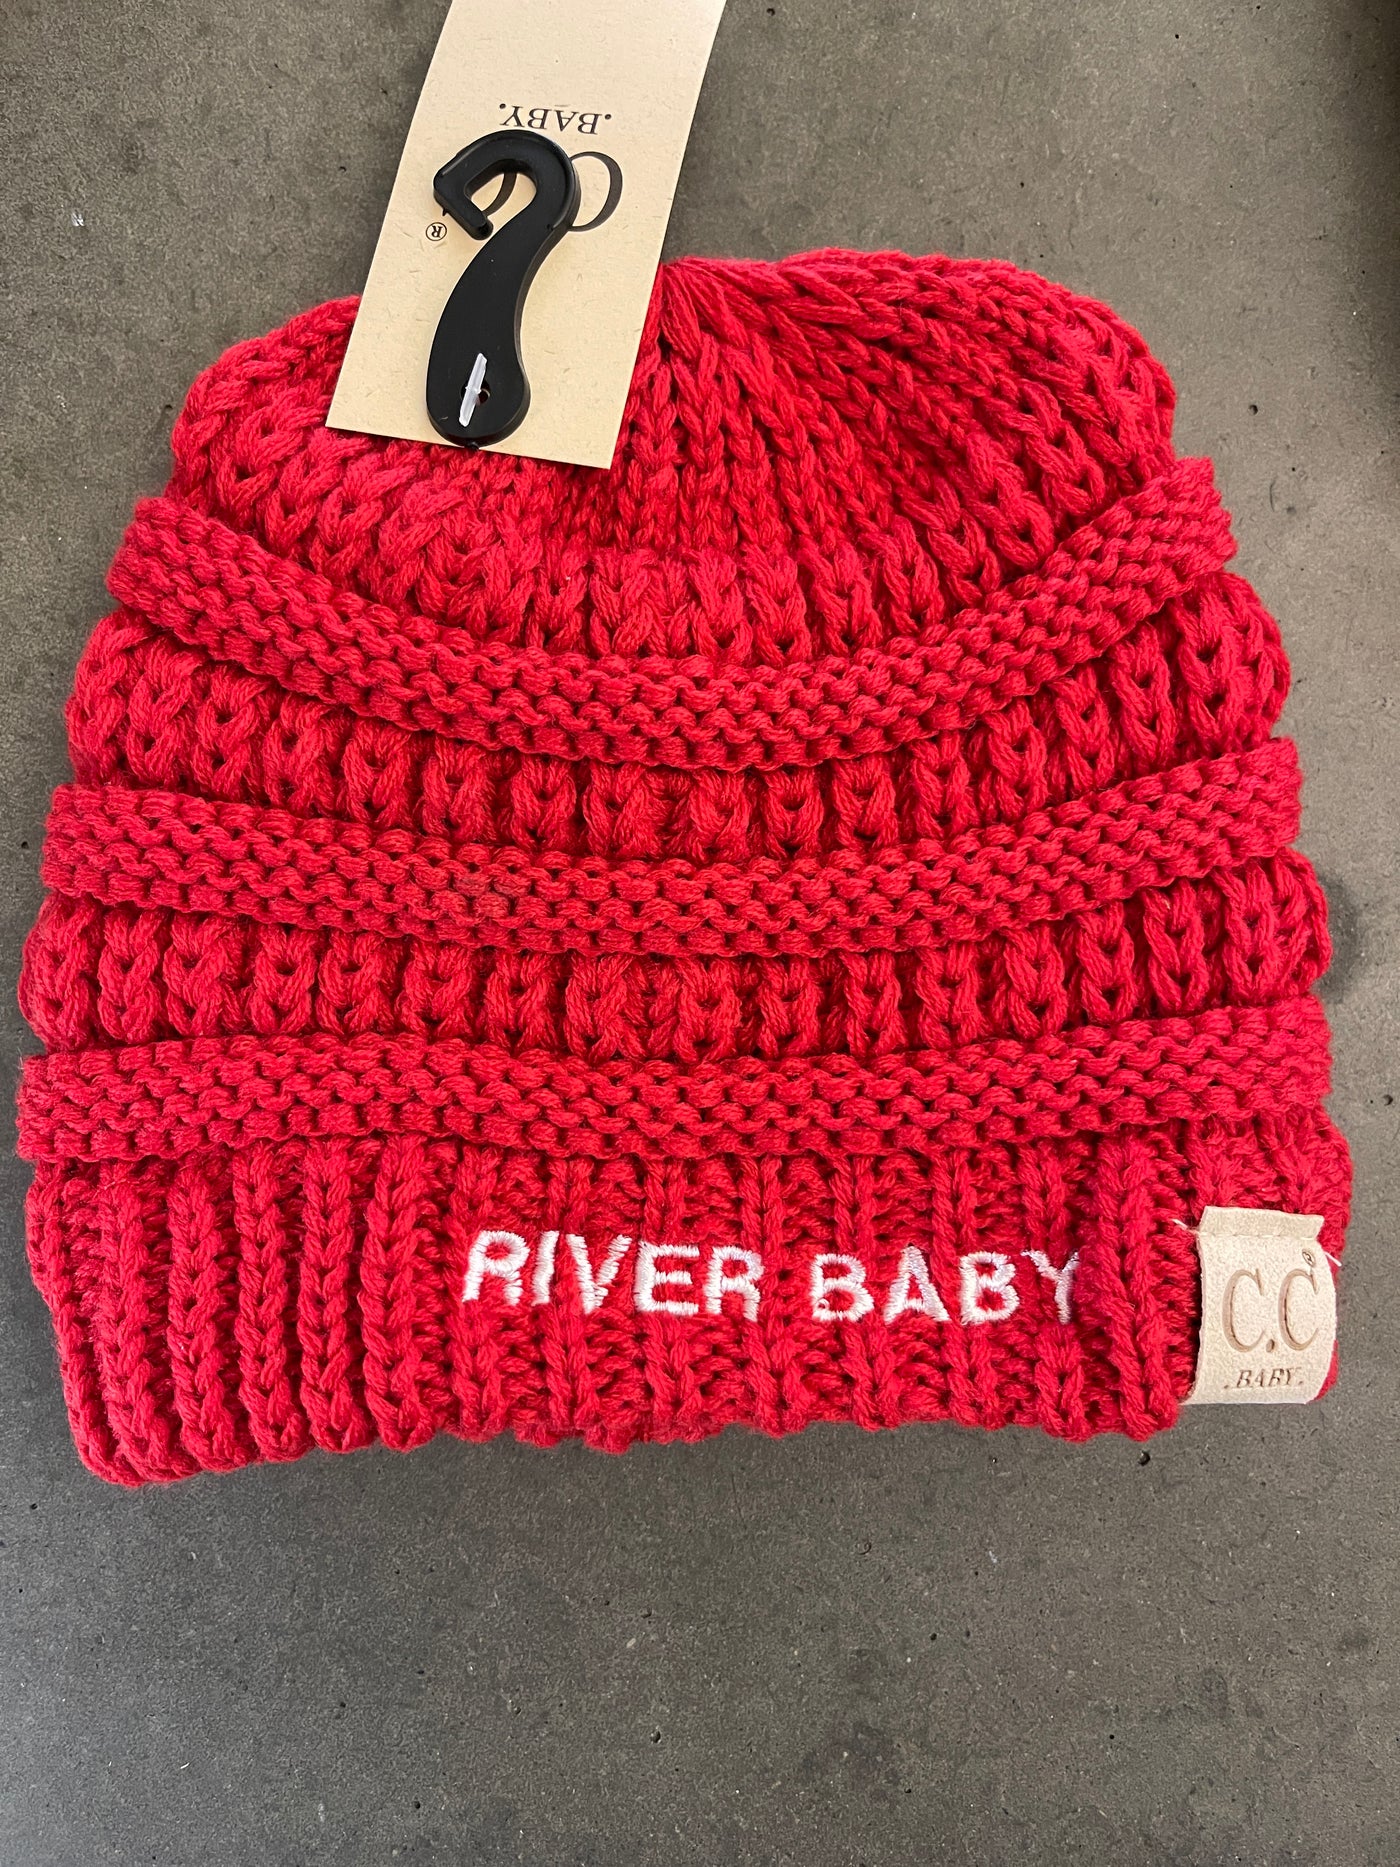 River baby beanie hats